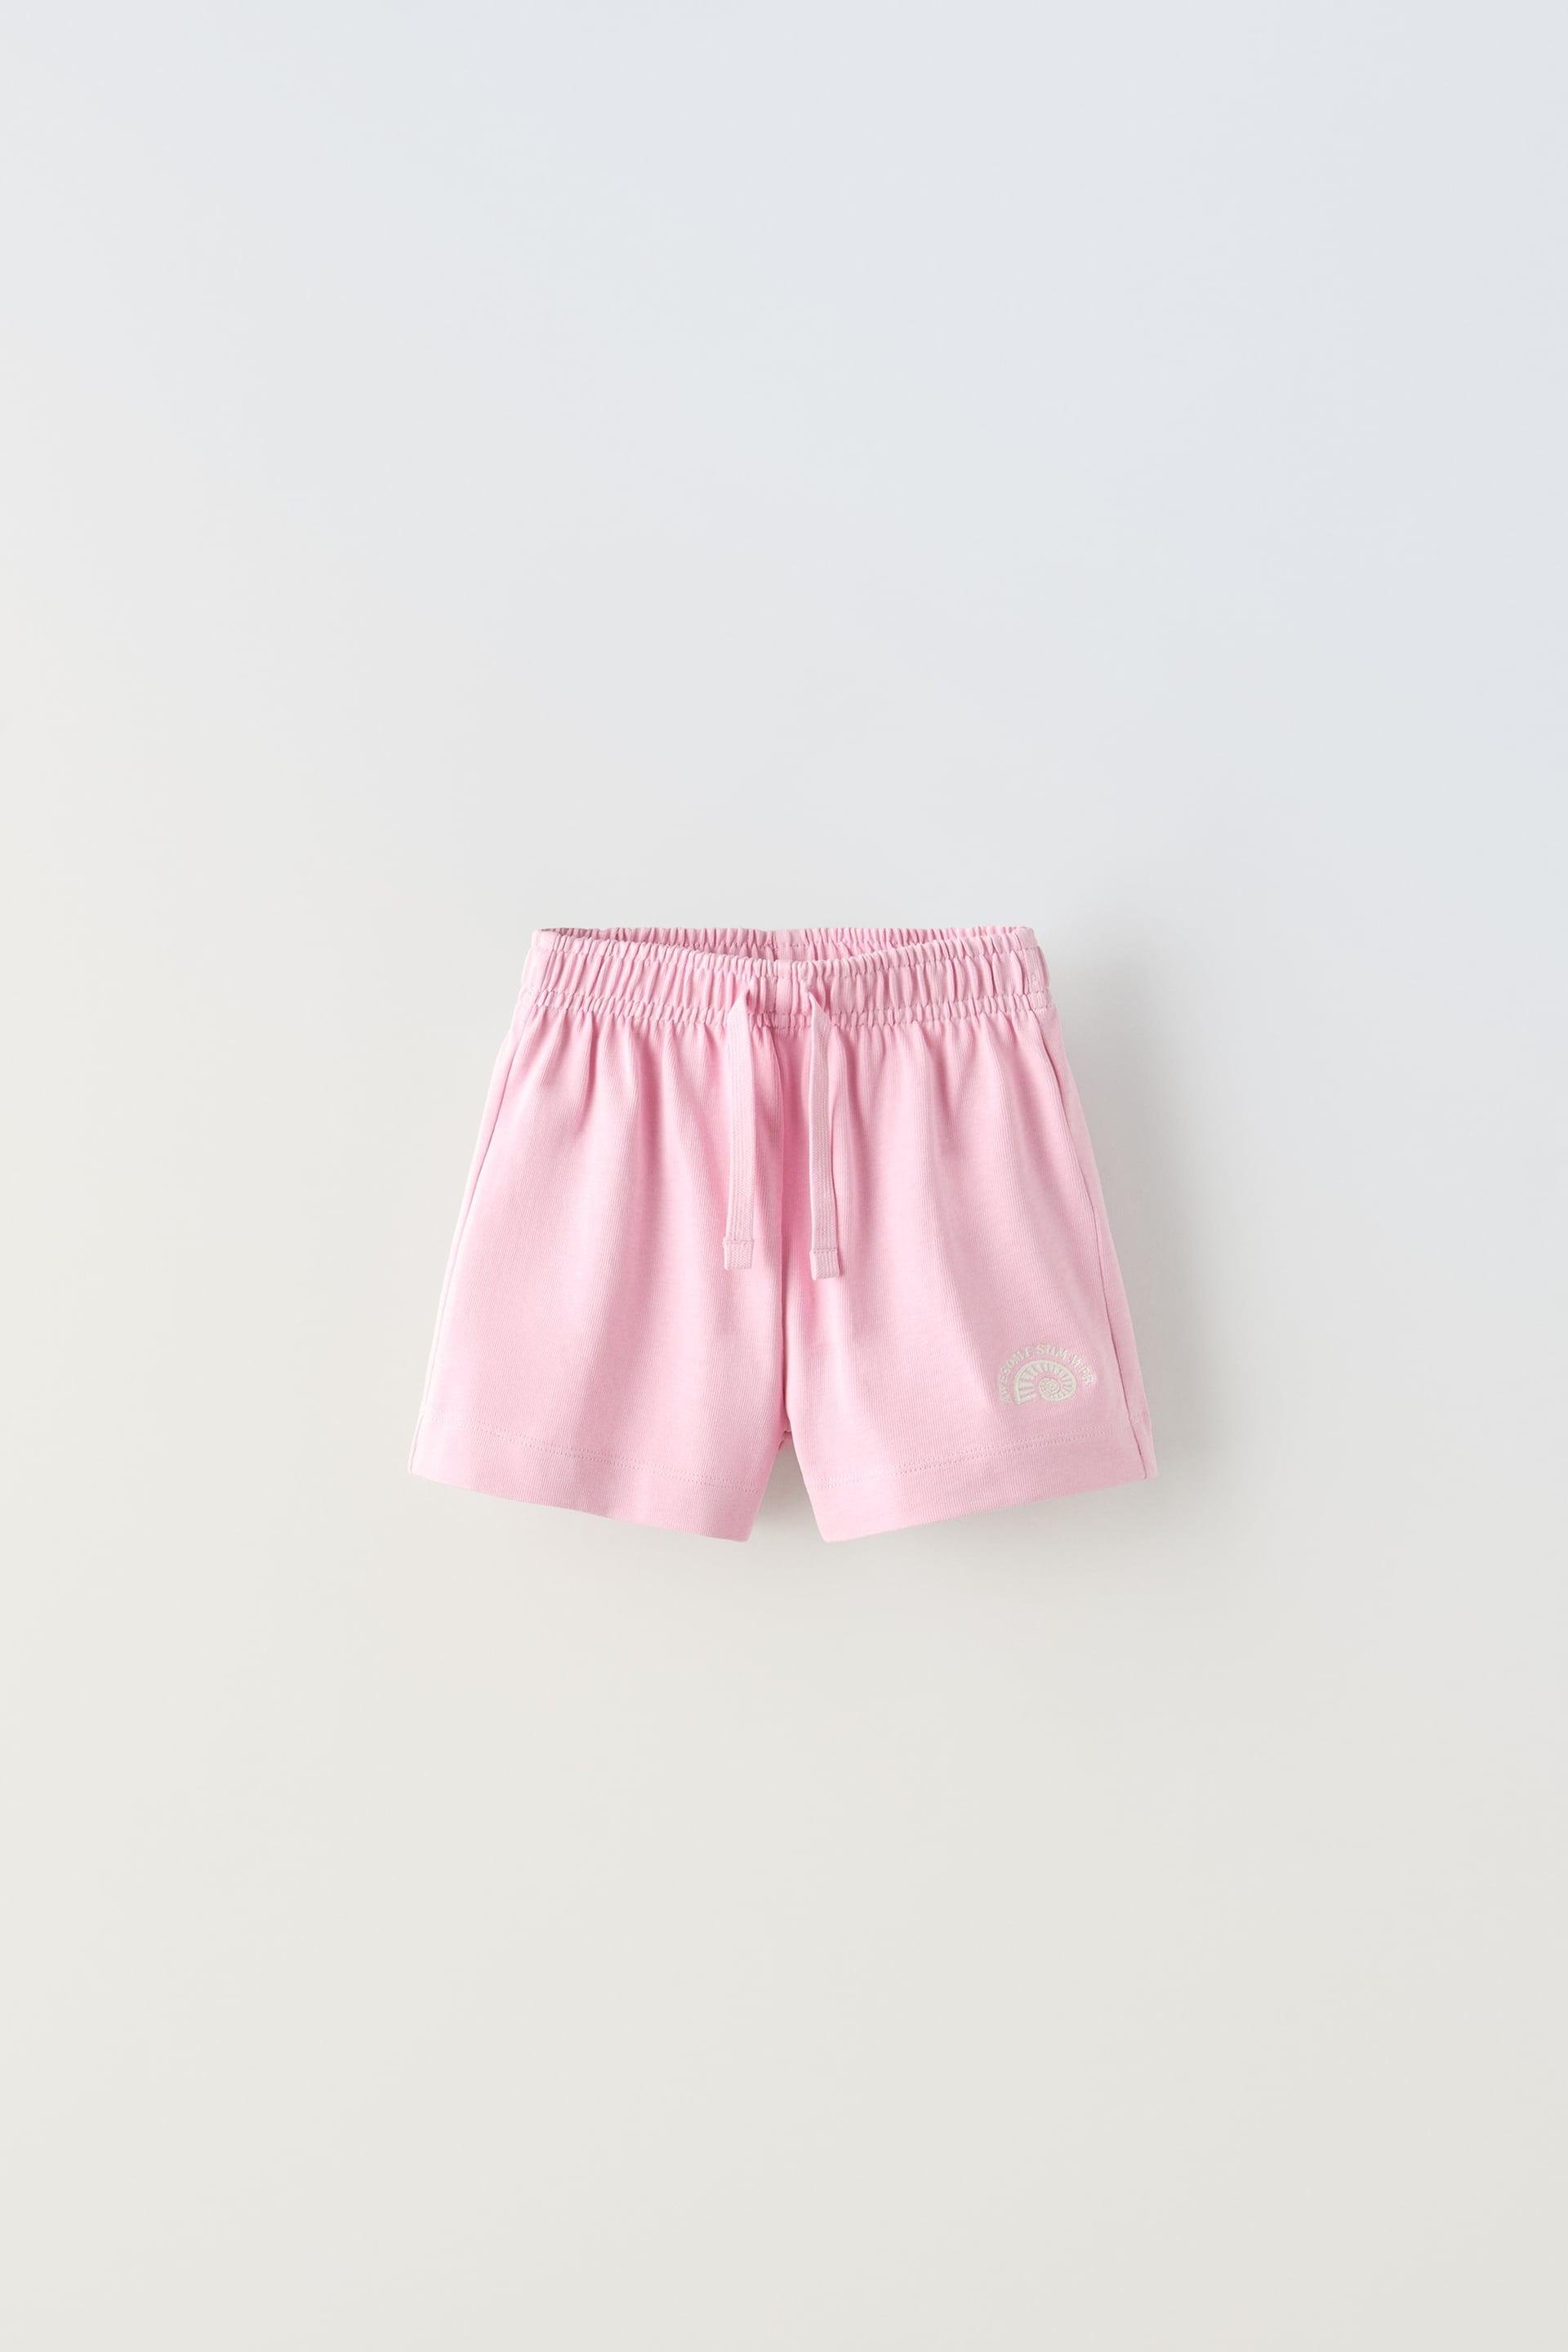 EMBROIDERED PLUSH SHORTS by ZARA